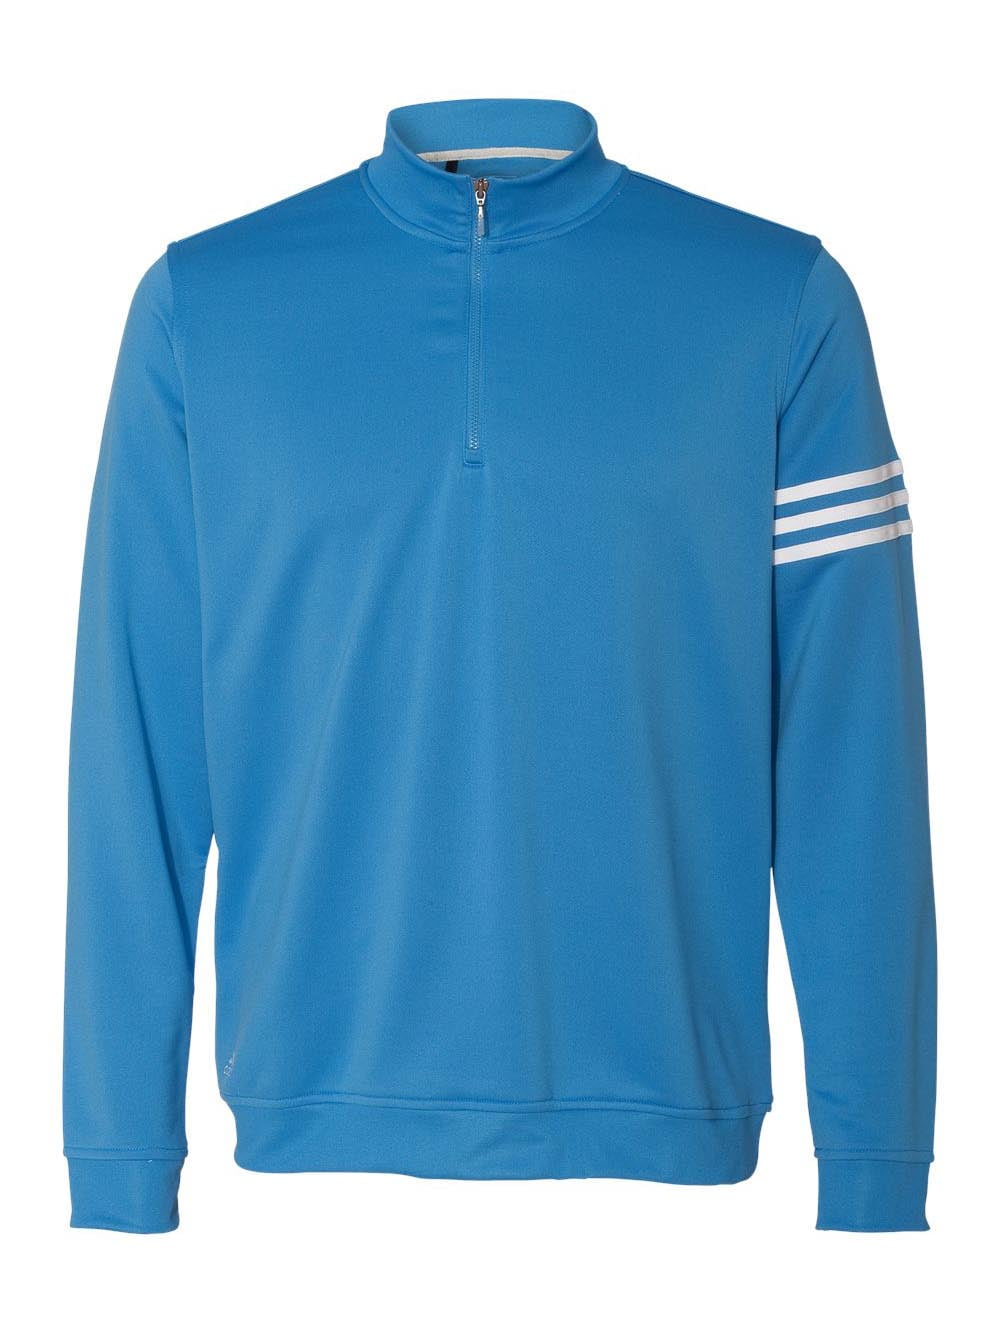 adidas climalite pullover